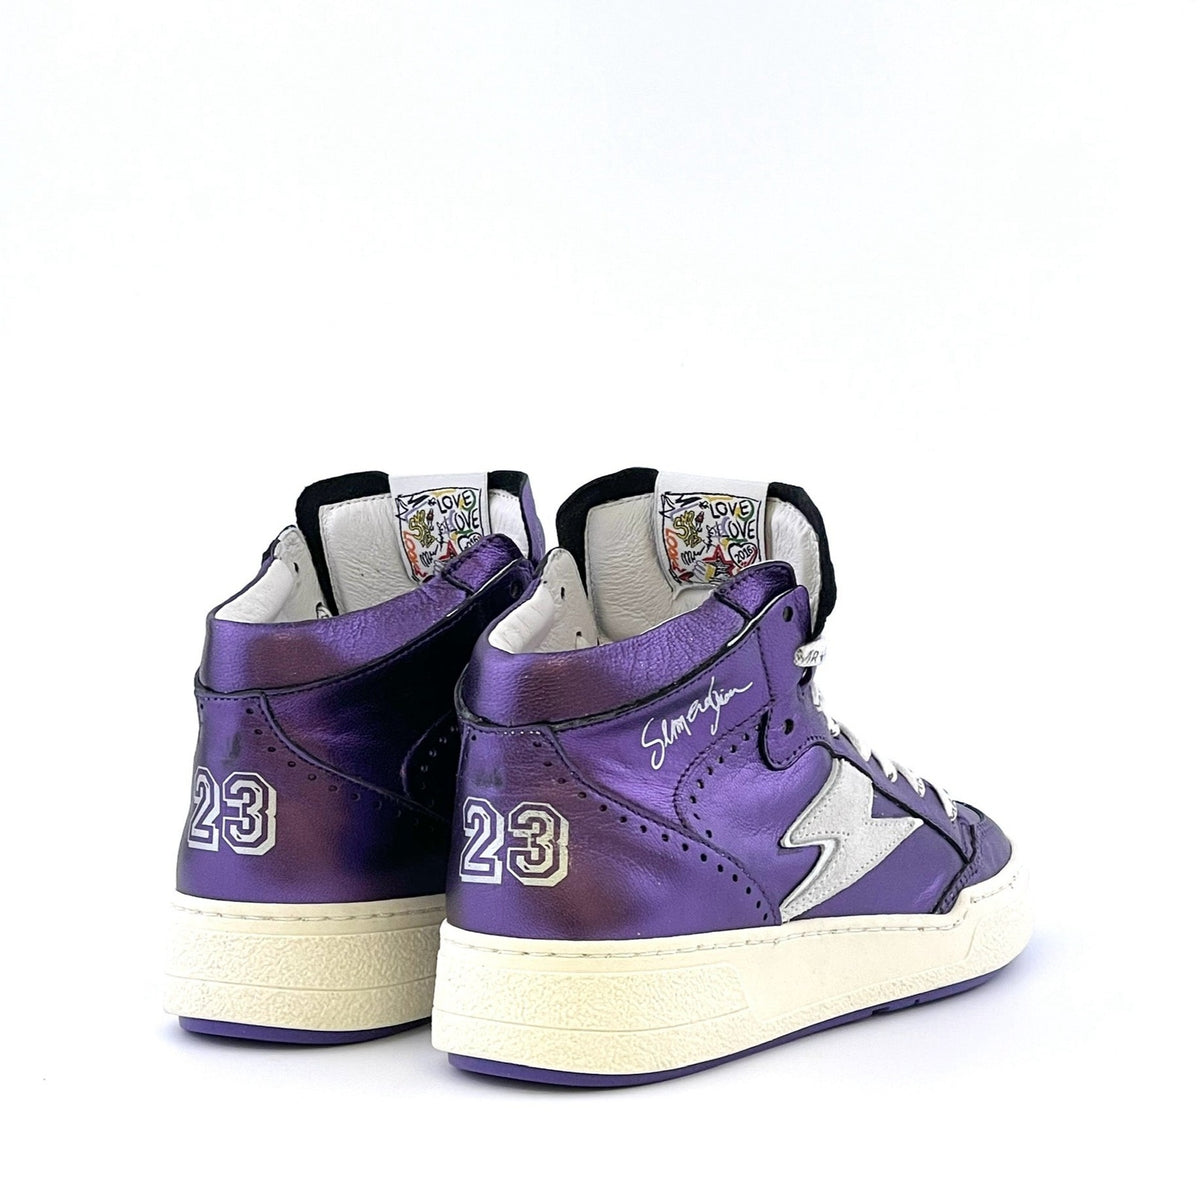 Sneakers SMR23